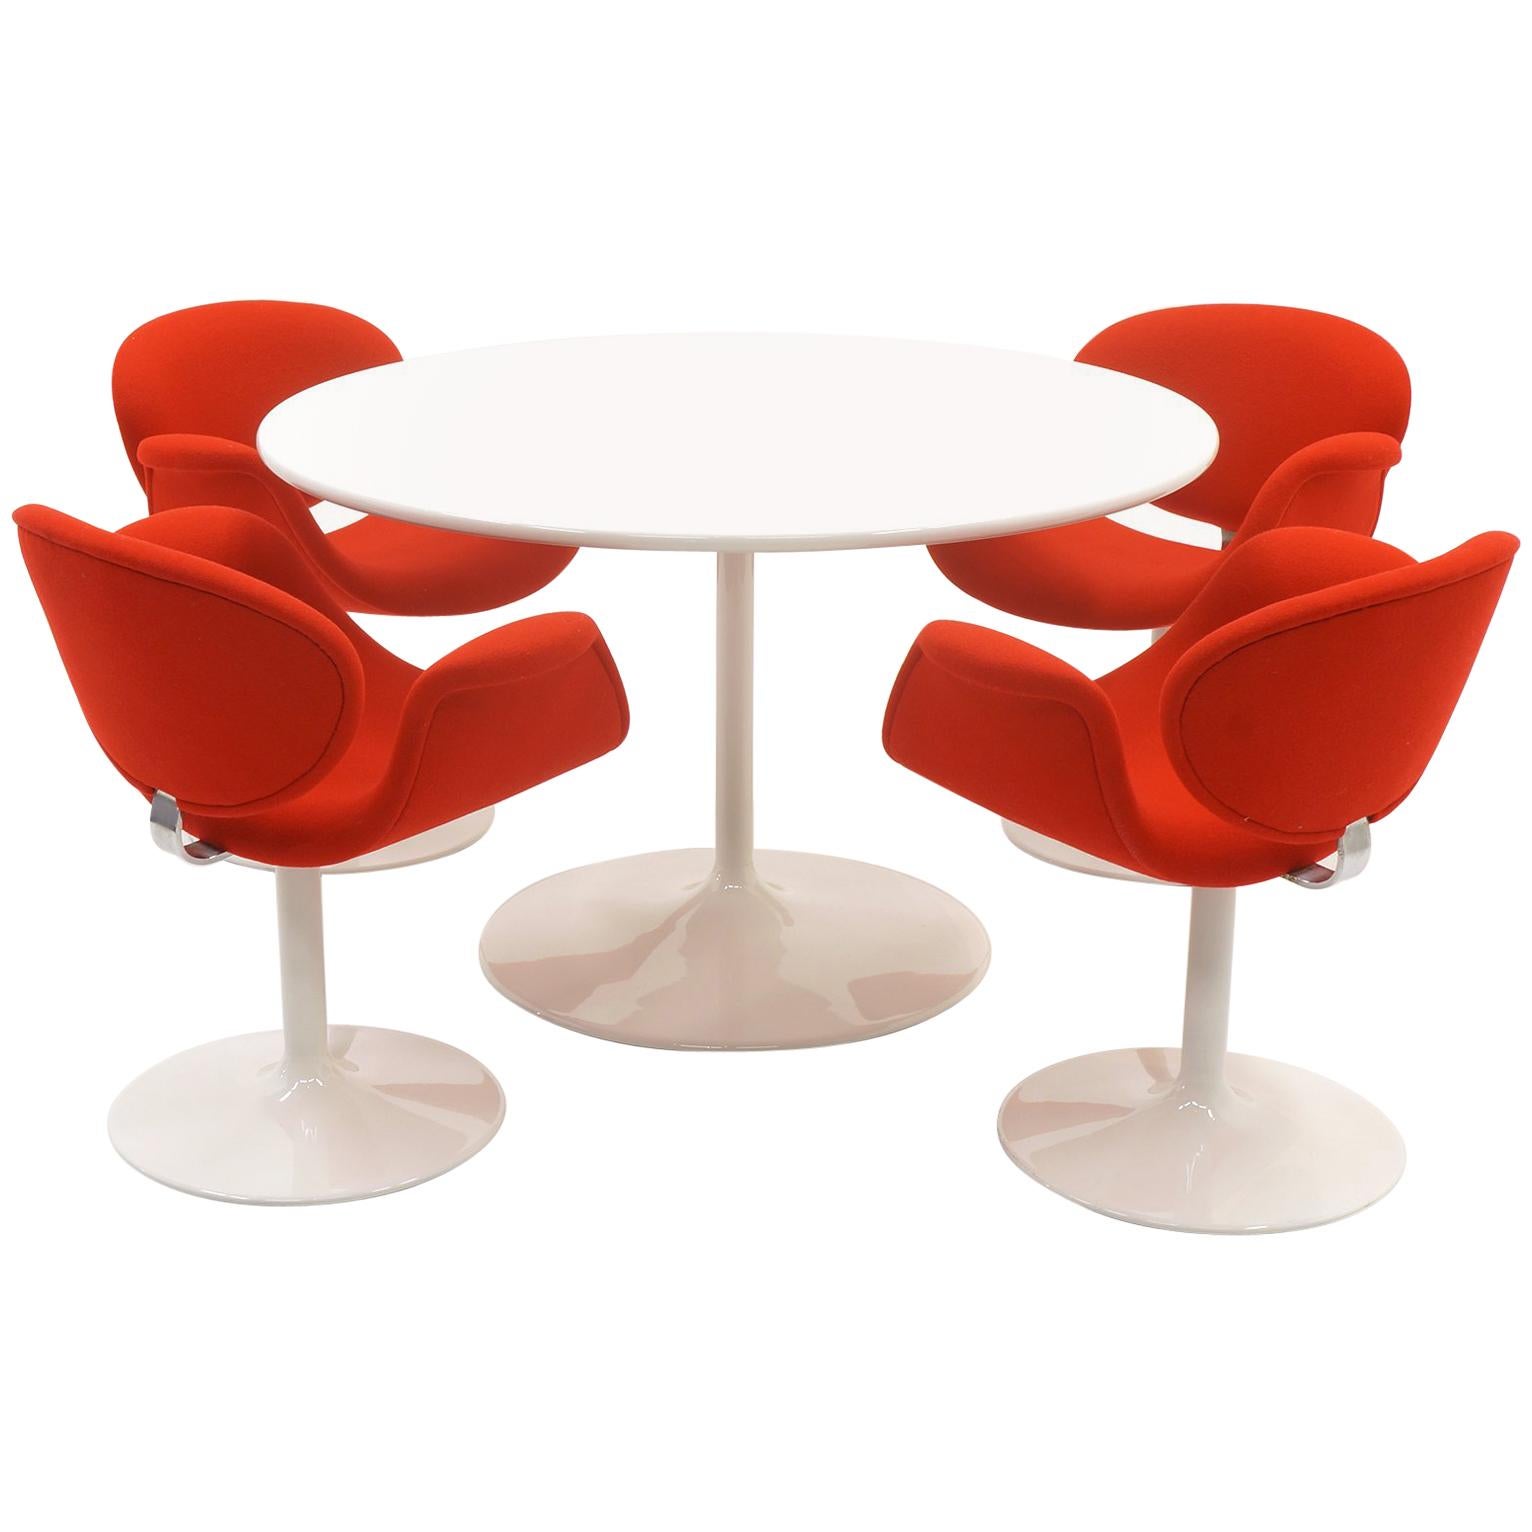 Early Pierre Paulin Dining / Kitchen Table Chairs, Red and White.  Excellent.